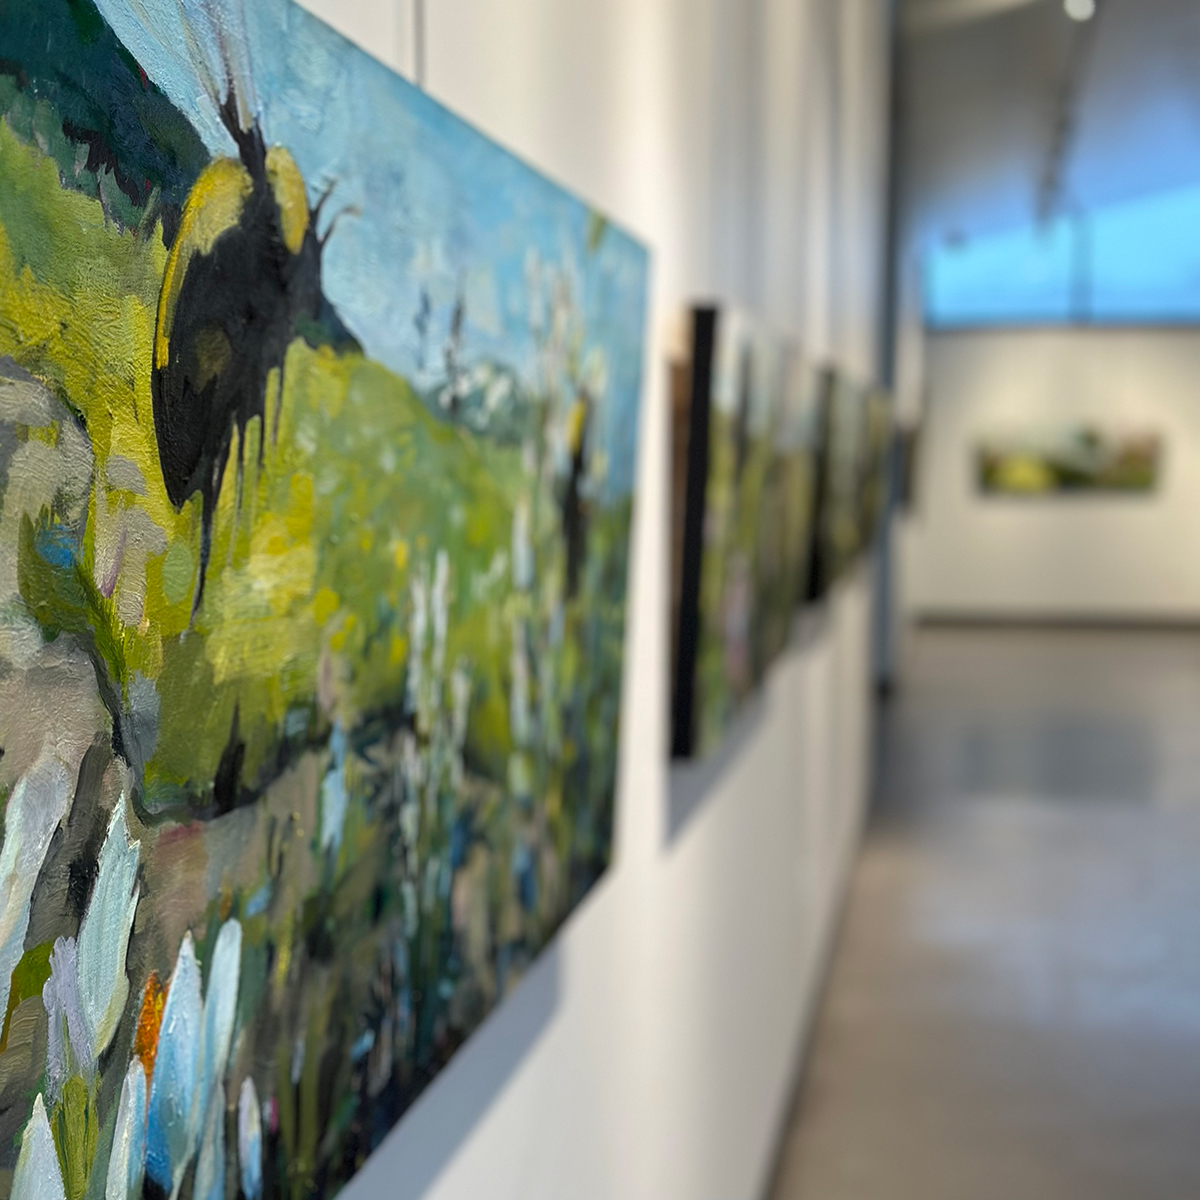 The paintings of Joe Maurer hanging in the Level 3 art gallery